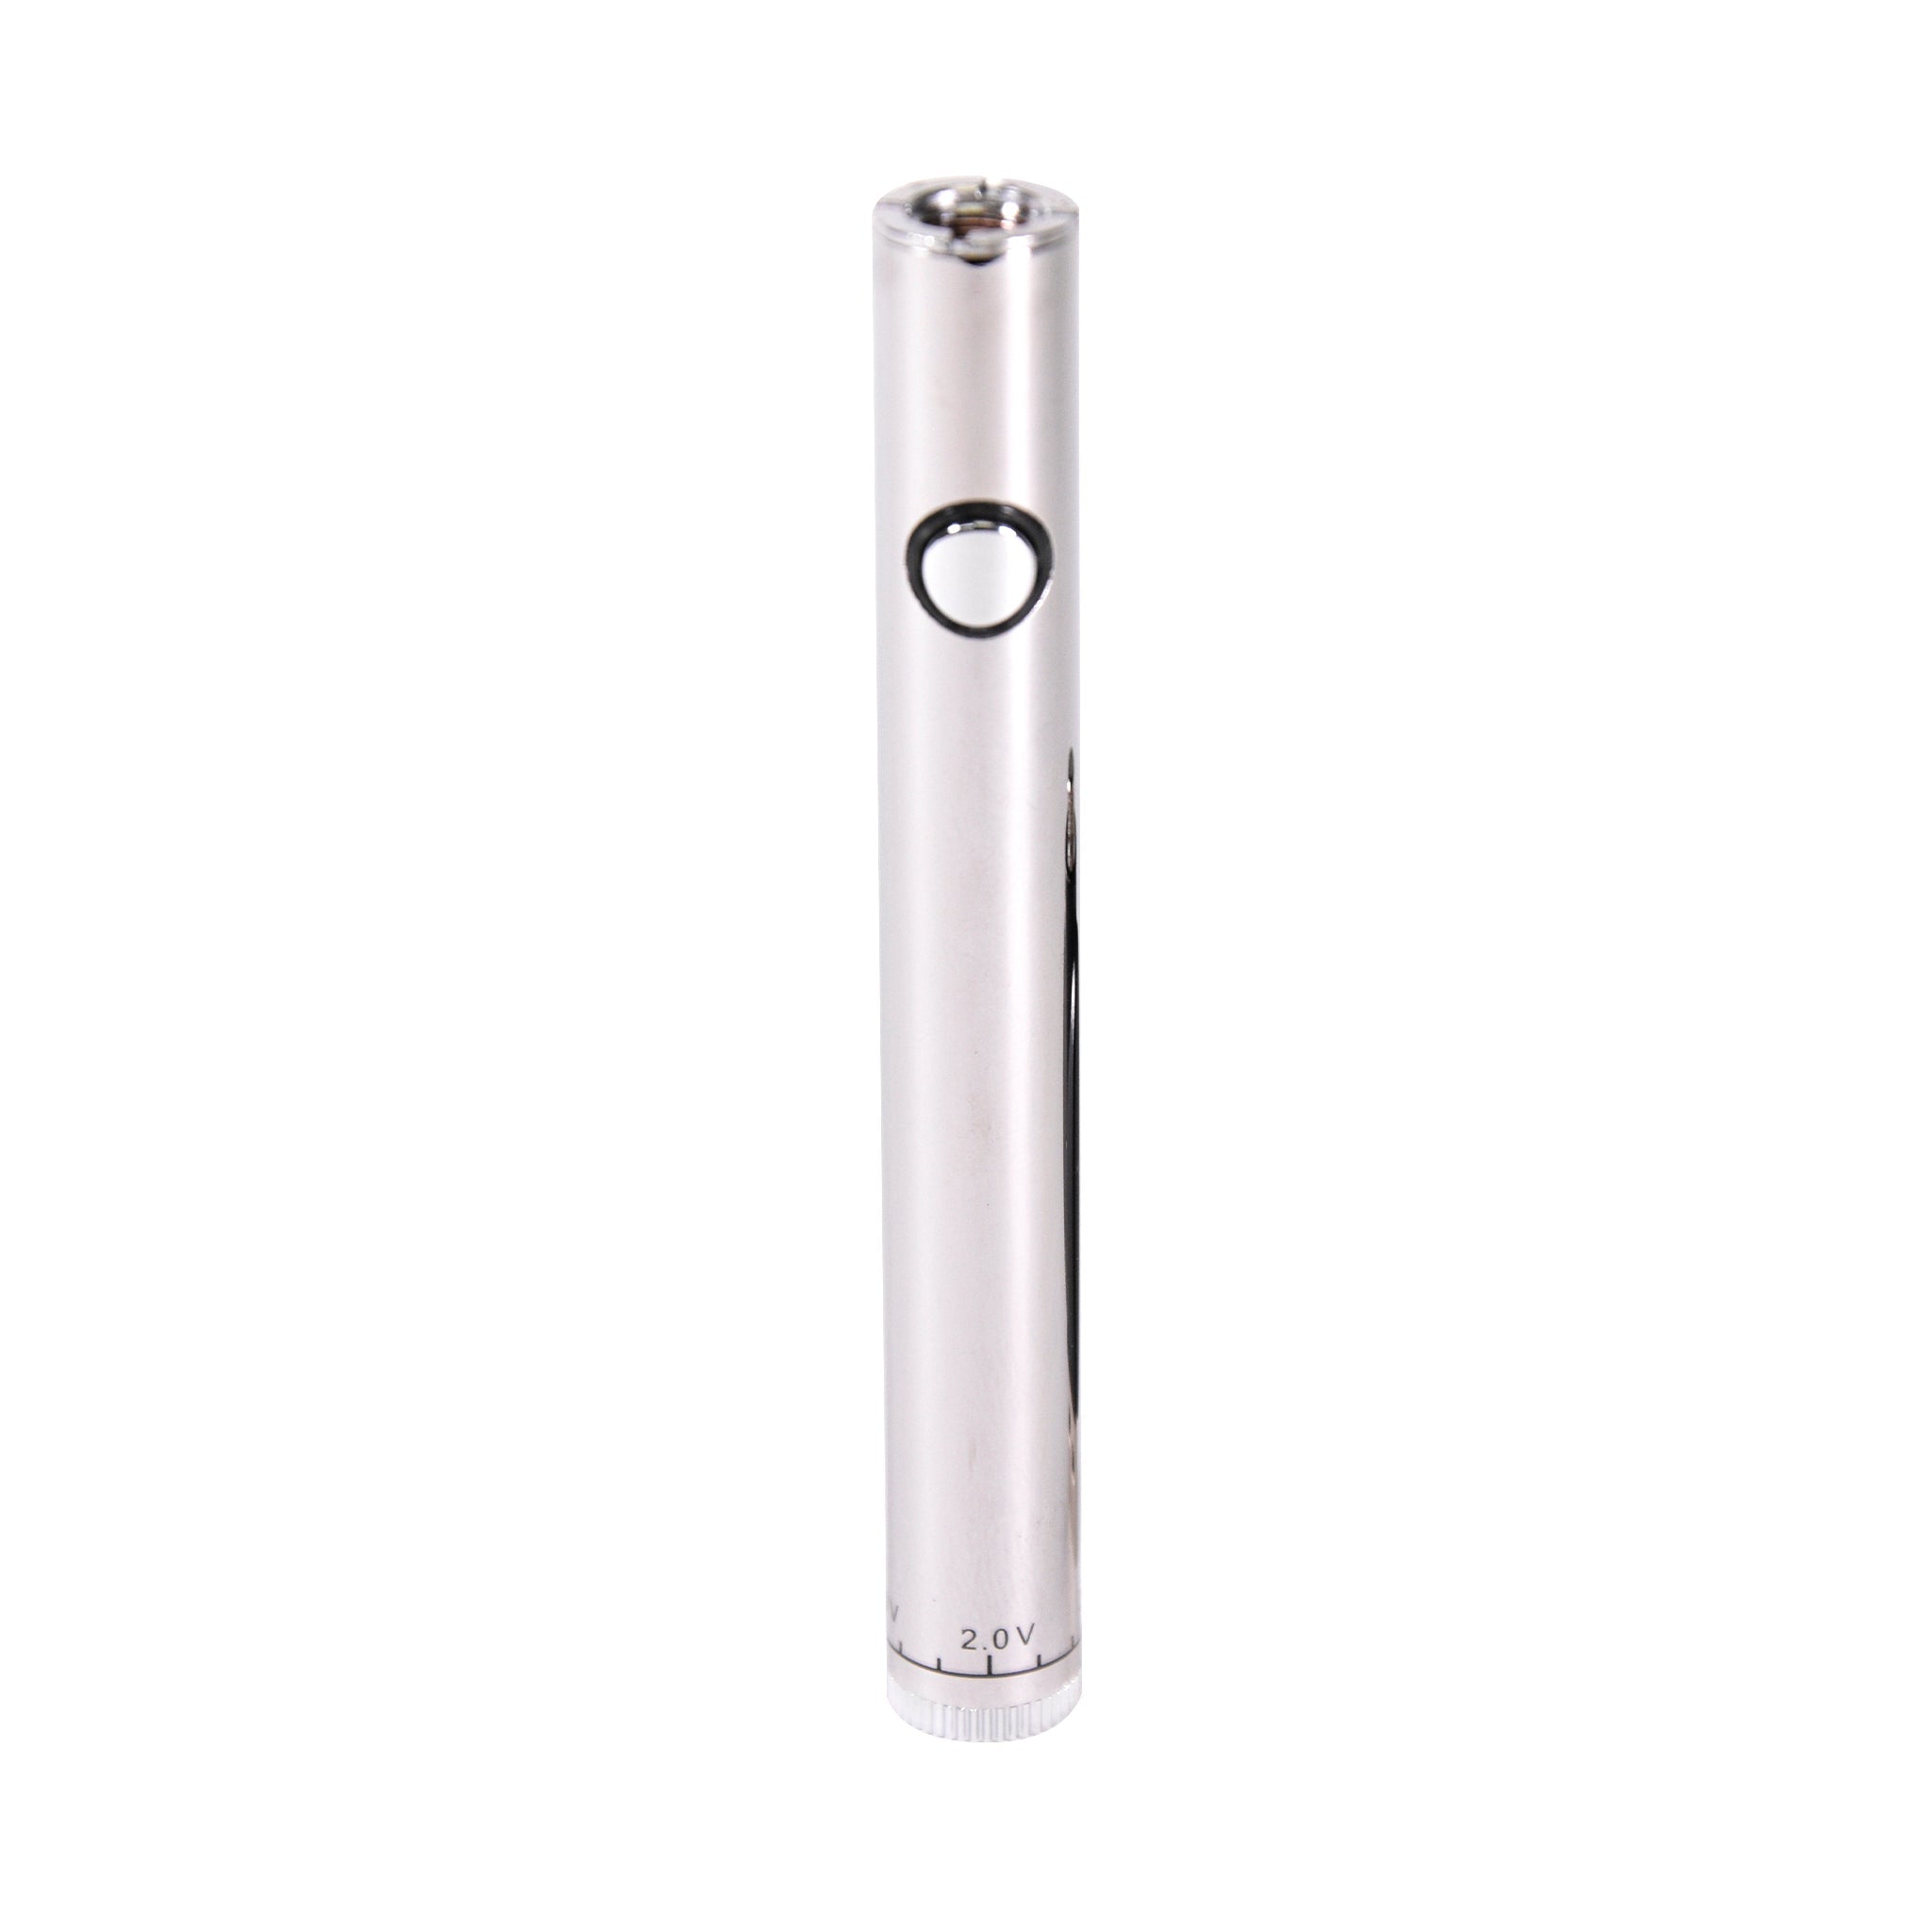 Twist Battery Pro Silver Adjustable Voltage 510 Cartridge Battery by Vape  Gear : CBDGuys : fast shipping, buy online with credit card